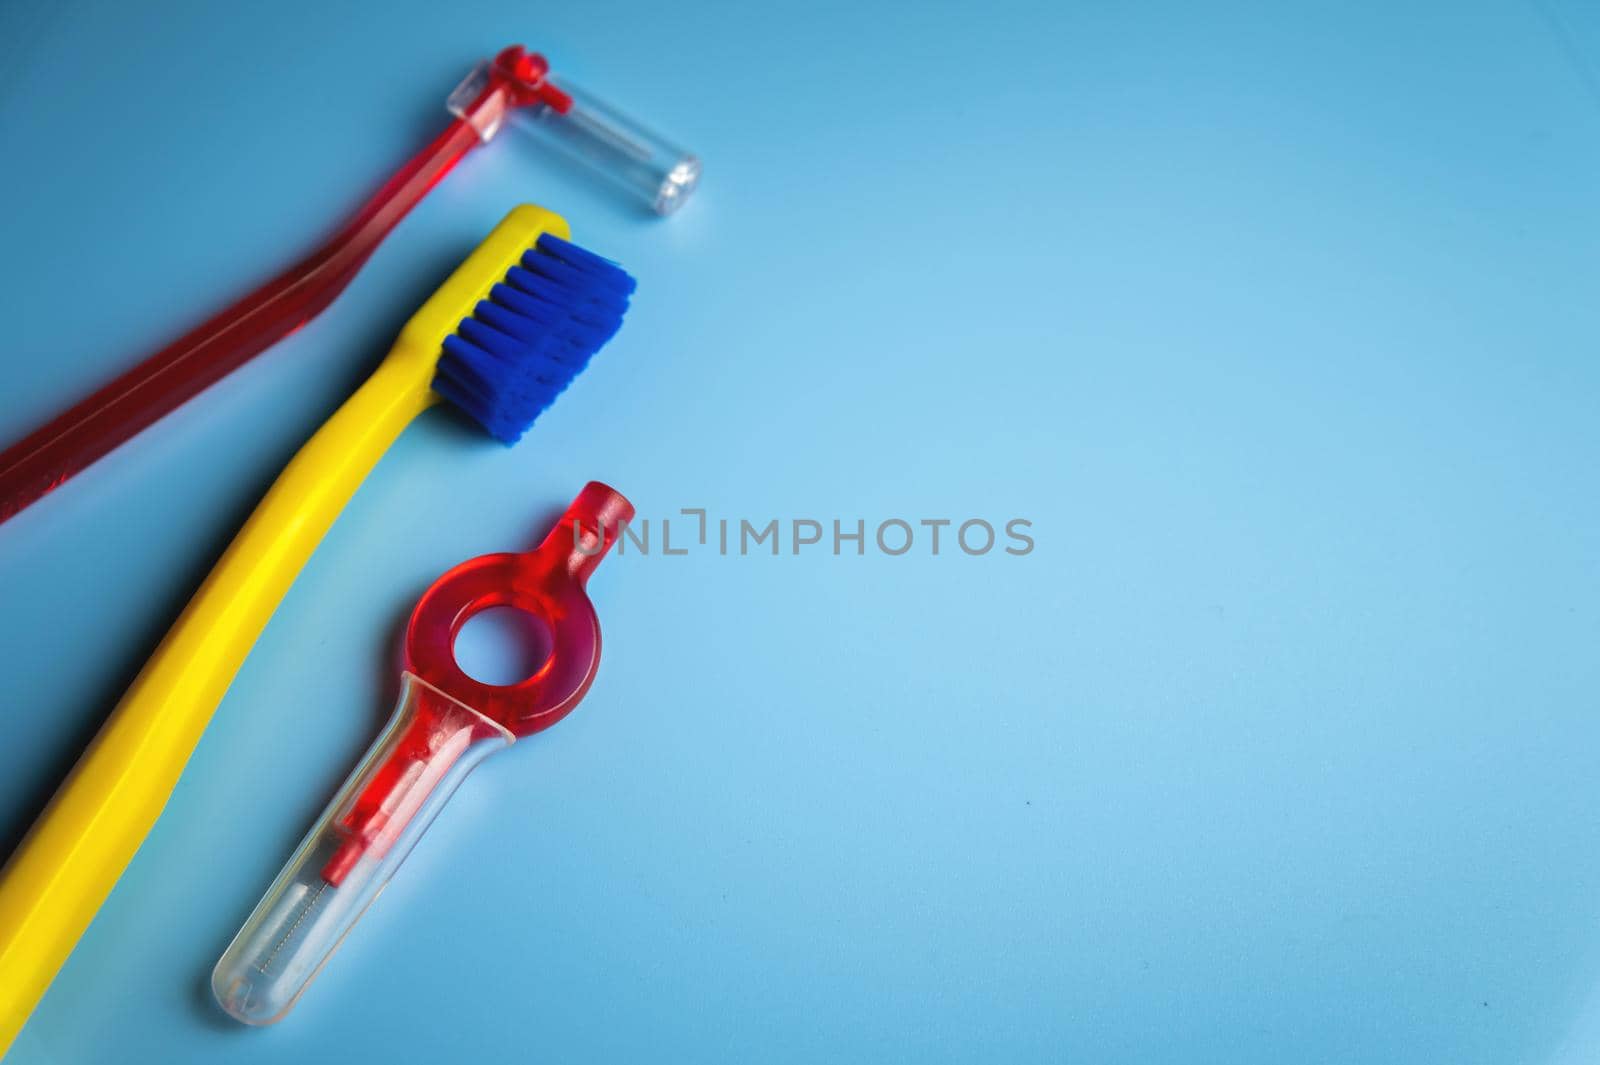 a bright toothbrush, a red orthodontic interdental brush lie on a blue background, no people.